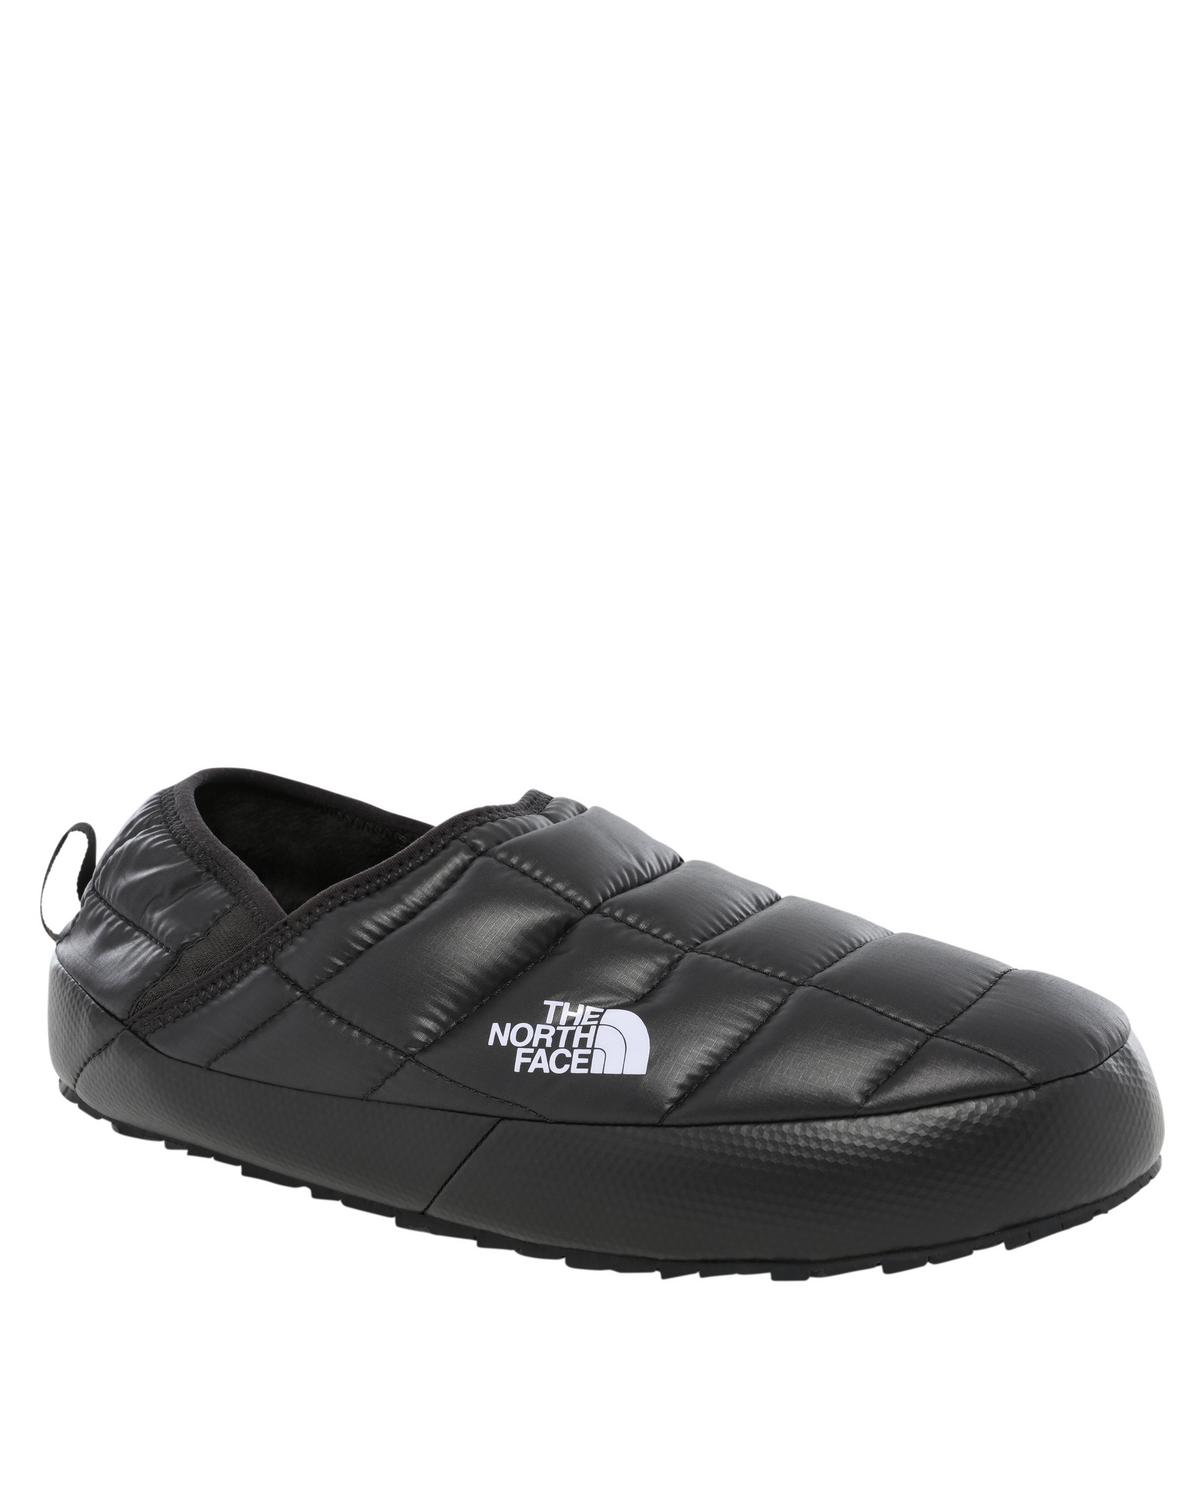 The North Face Men's ThermoBall™ Traction V Mule Slippers -  Black